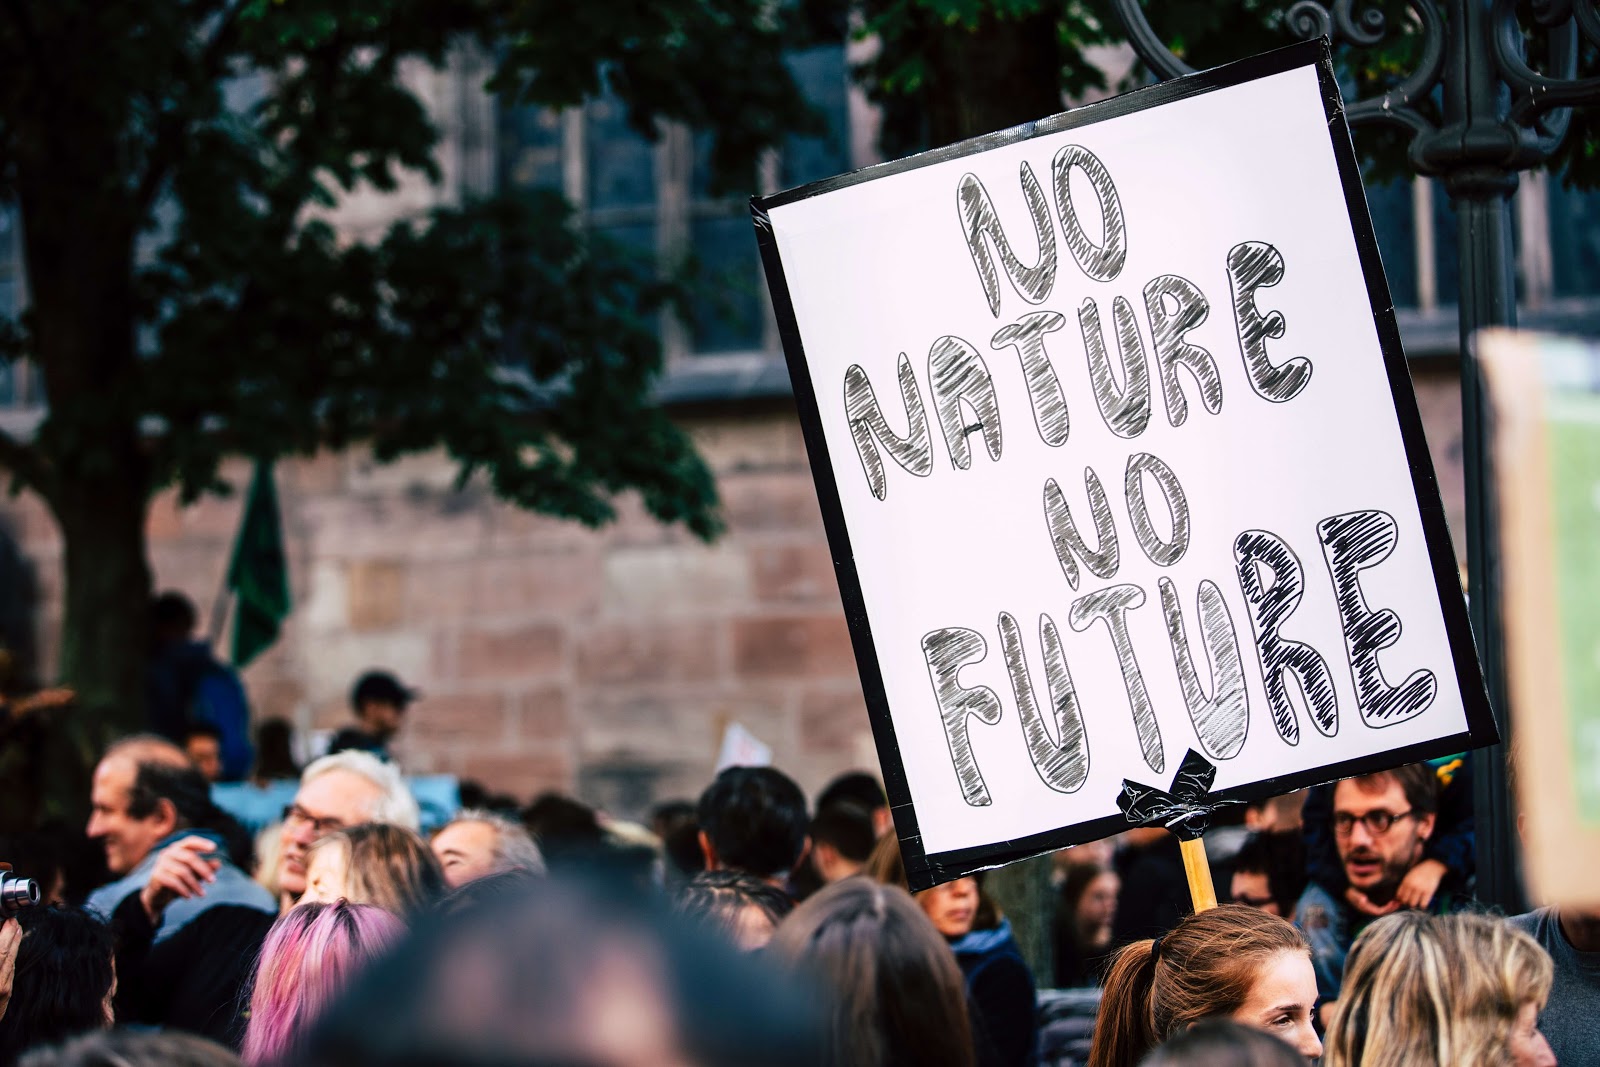 Protesters with a sign saying "No nature nofuture"